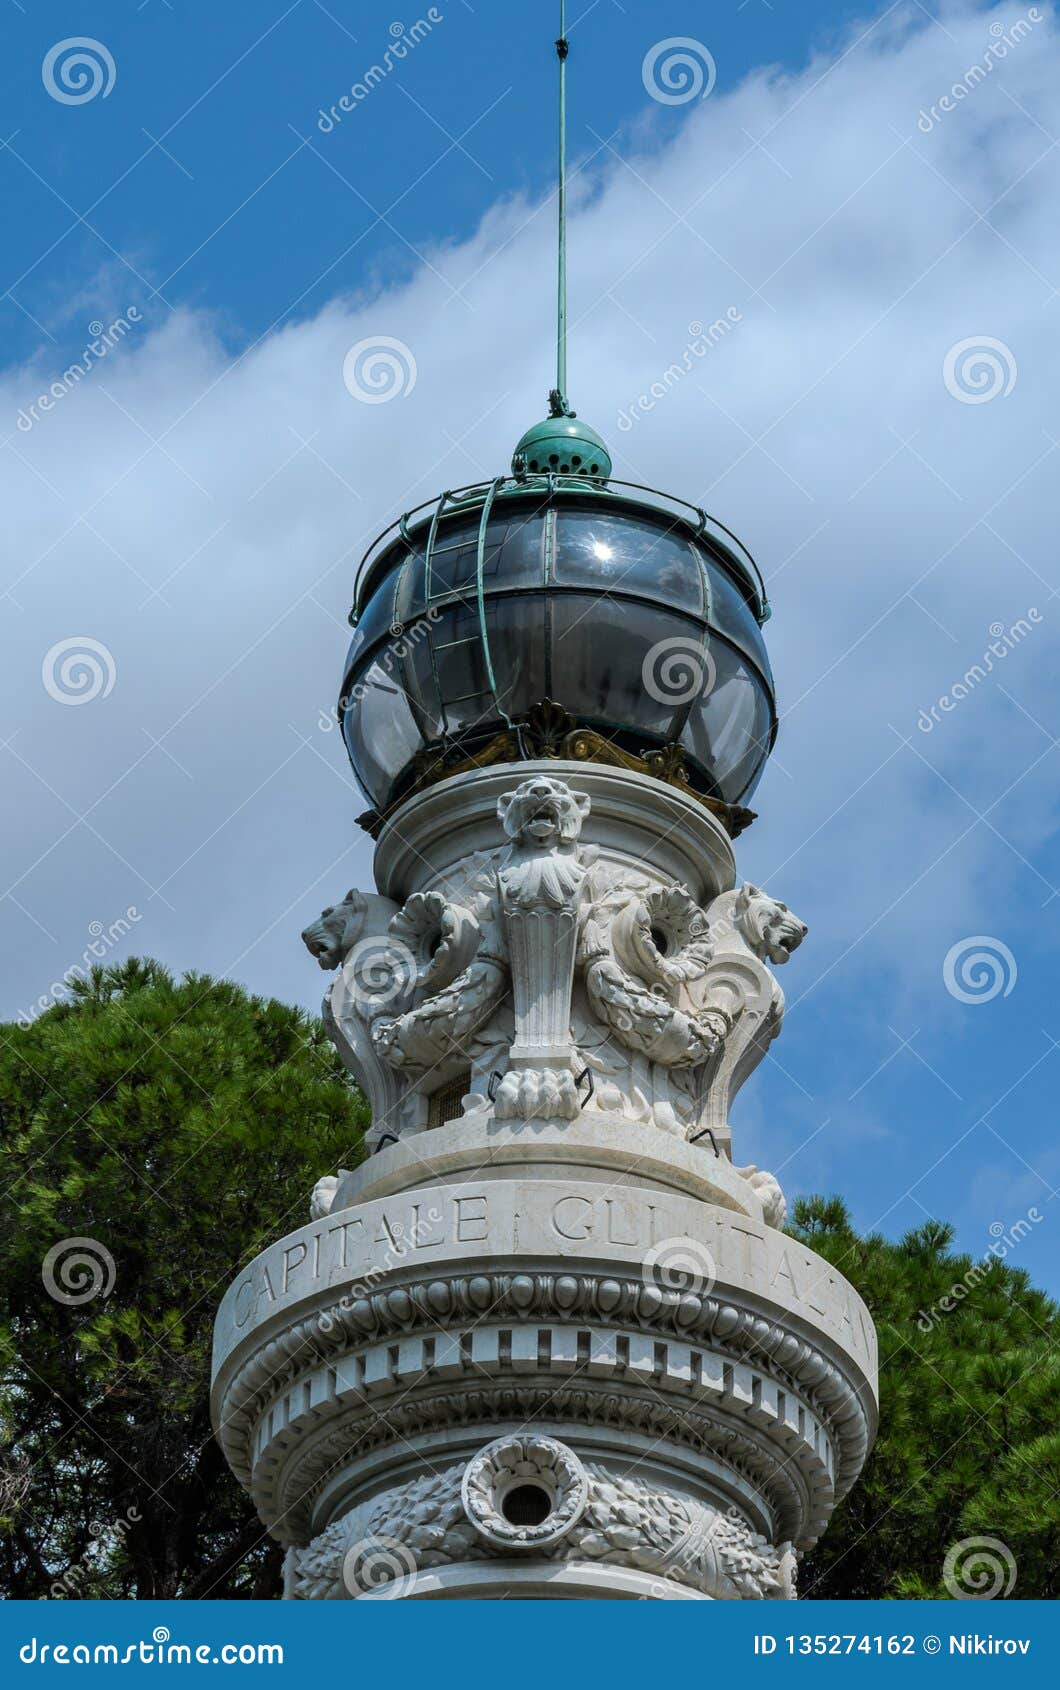 antique lighthouse in rome, italy stock photo - image of